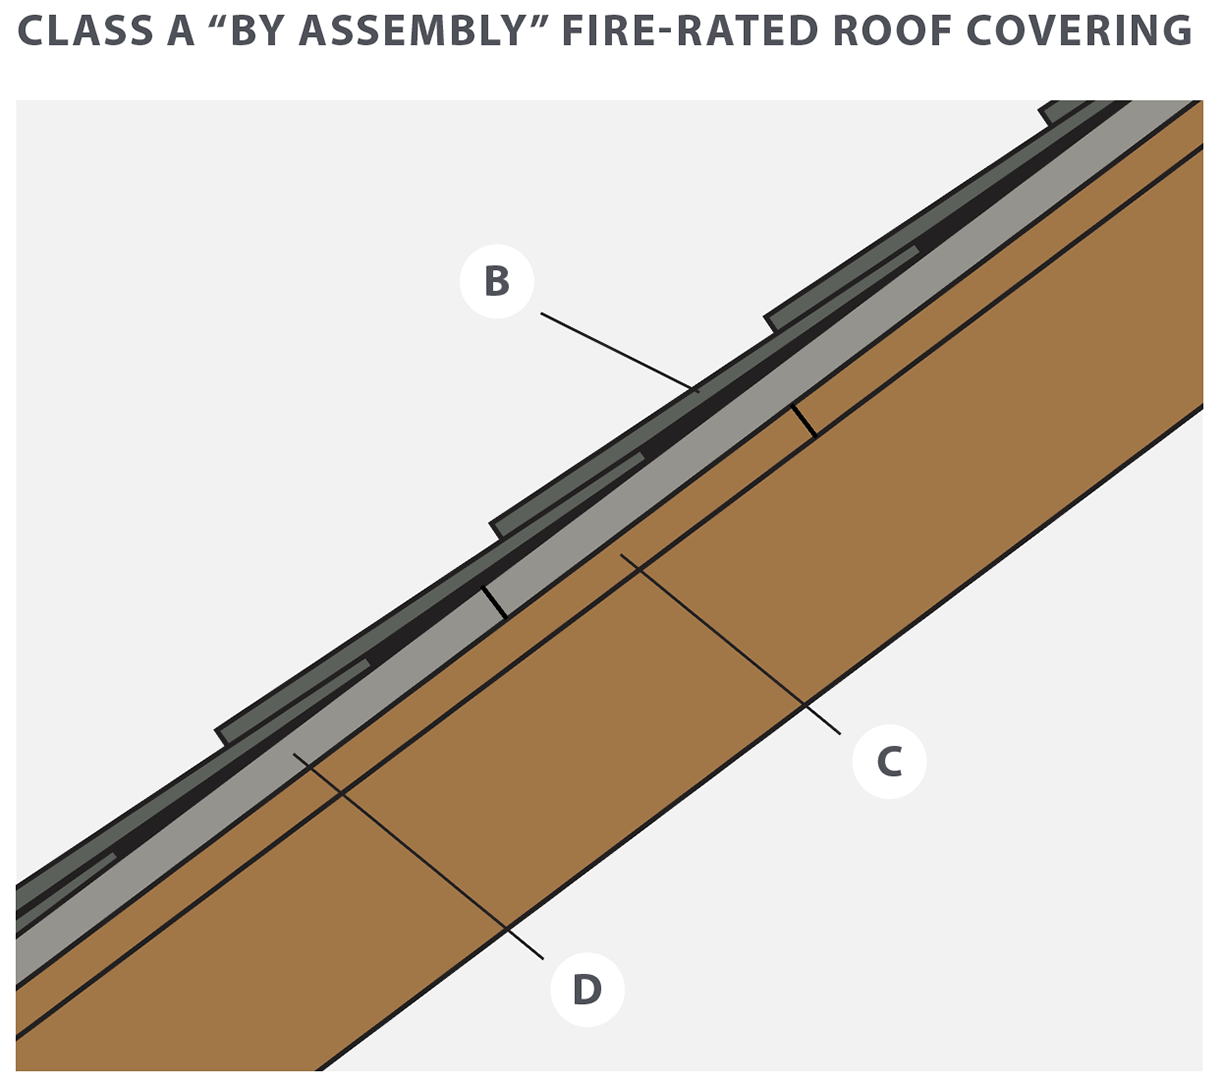 LWF_Fire-Rated-Roof-Covering